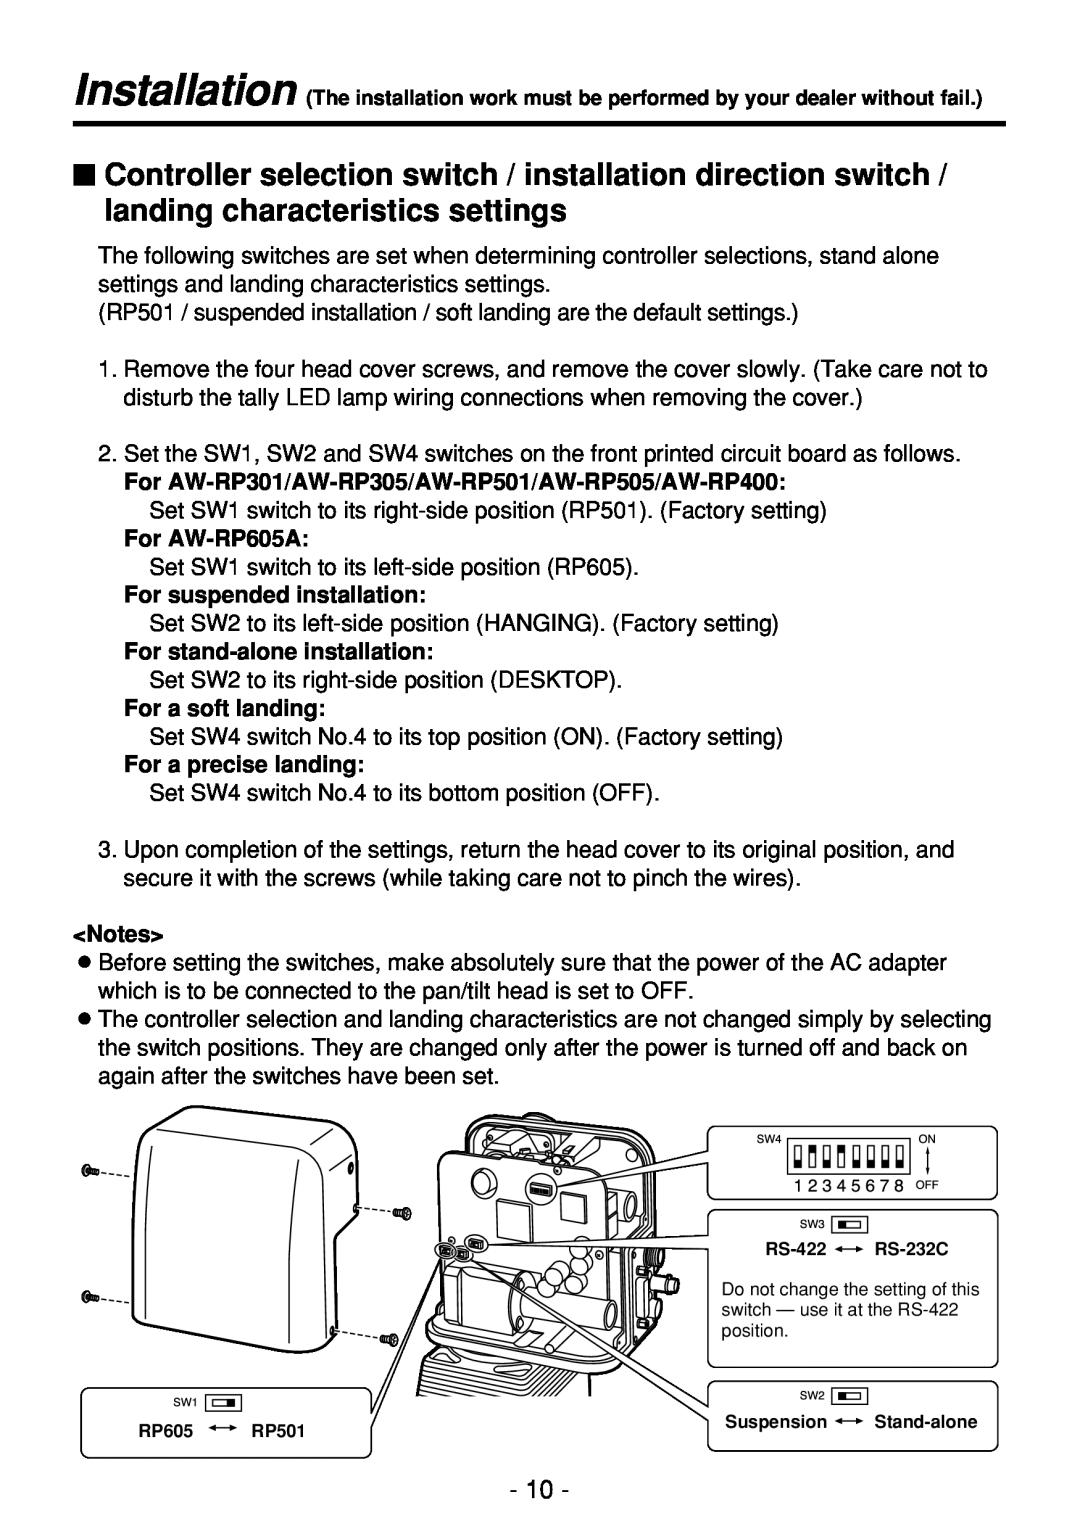 Panasonic AW-PH360N manual For AW-RP605A, For suspended installation, For stand-alone installation, For a soft landing 